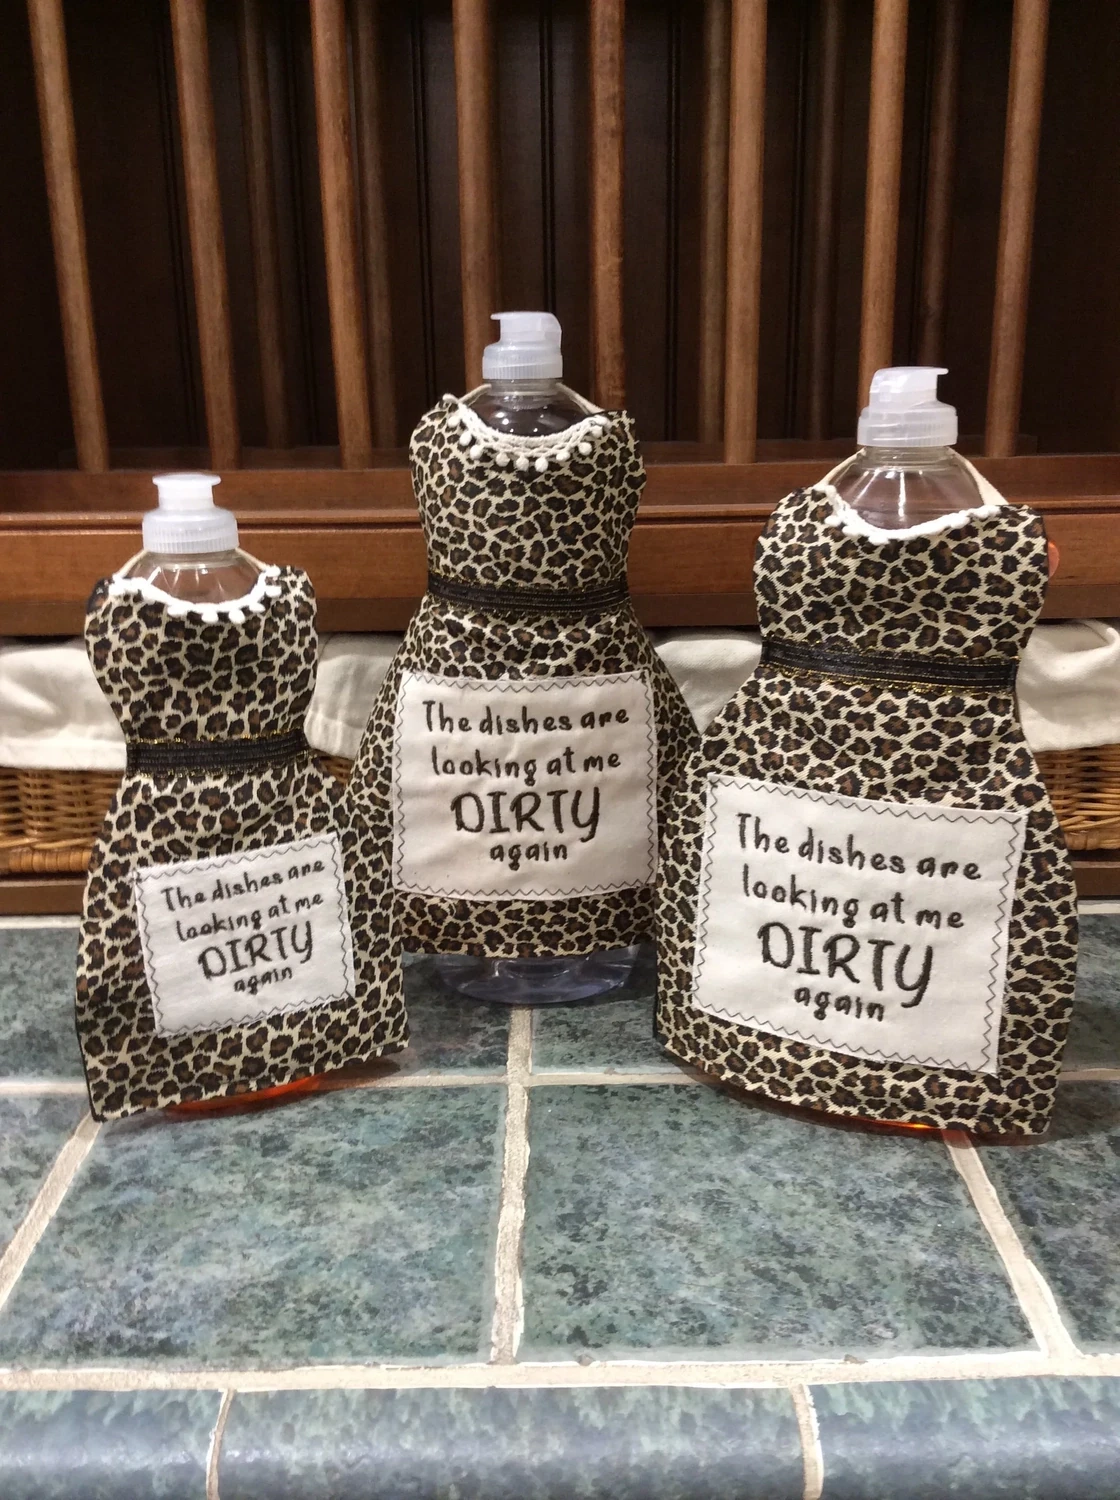 Kitchen Dish Soap Dress Cover, Dish Soap, Dish Soap Bottle Cover, Liquid Soap Bottle Apron - BEST SELLING - Embroidered Animal Print, Select Dress Cover Size: Small - 14 fl oz